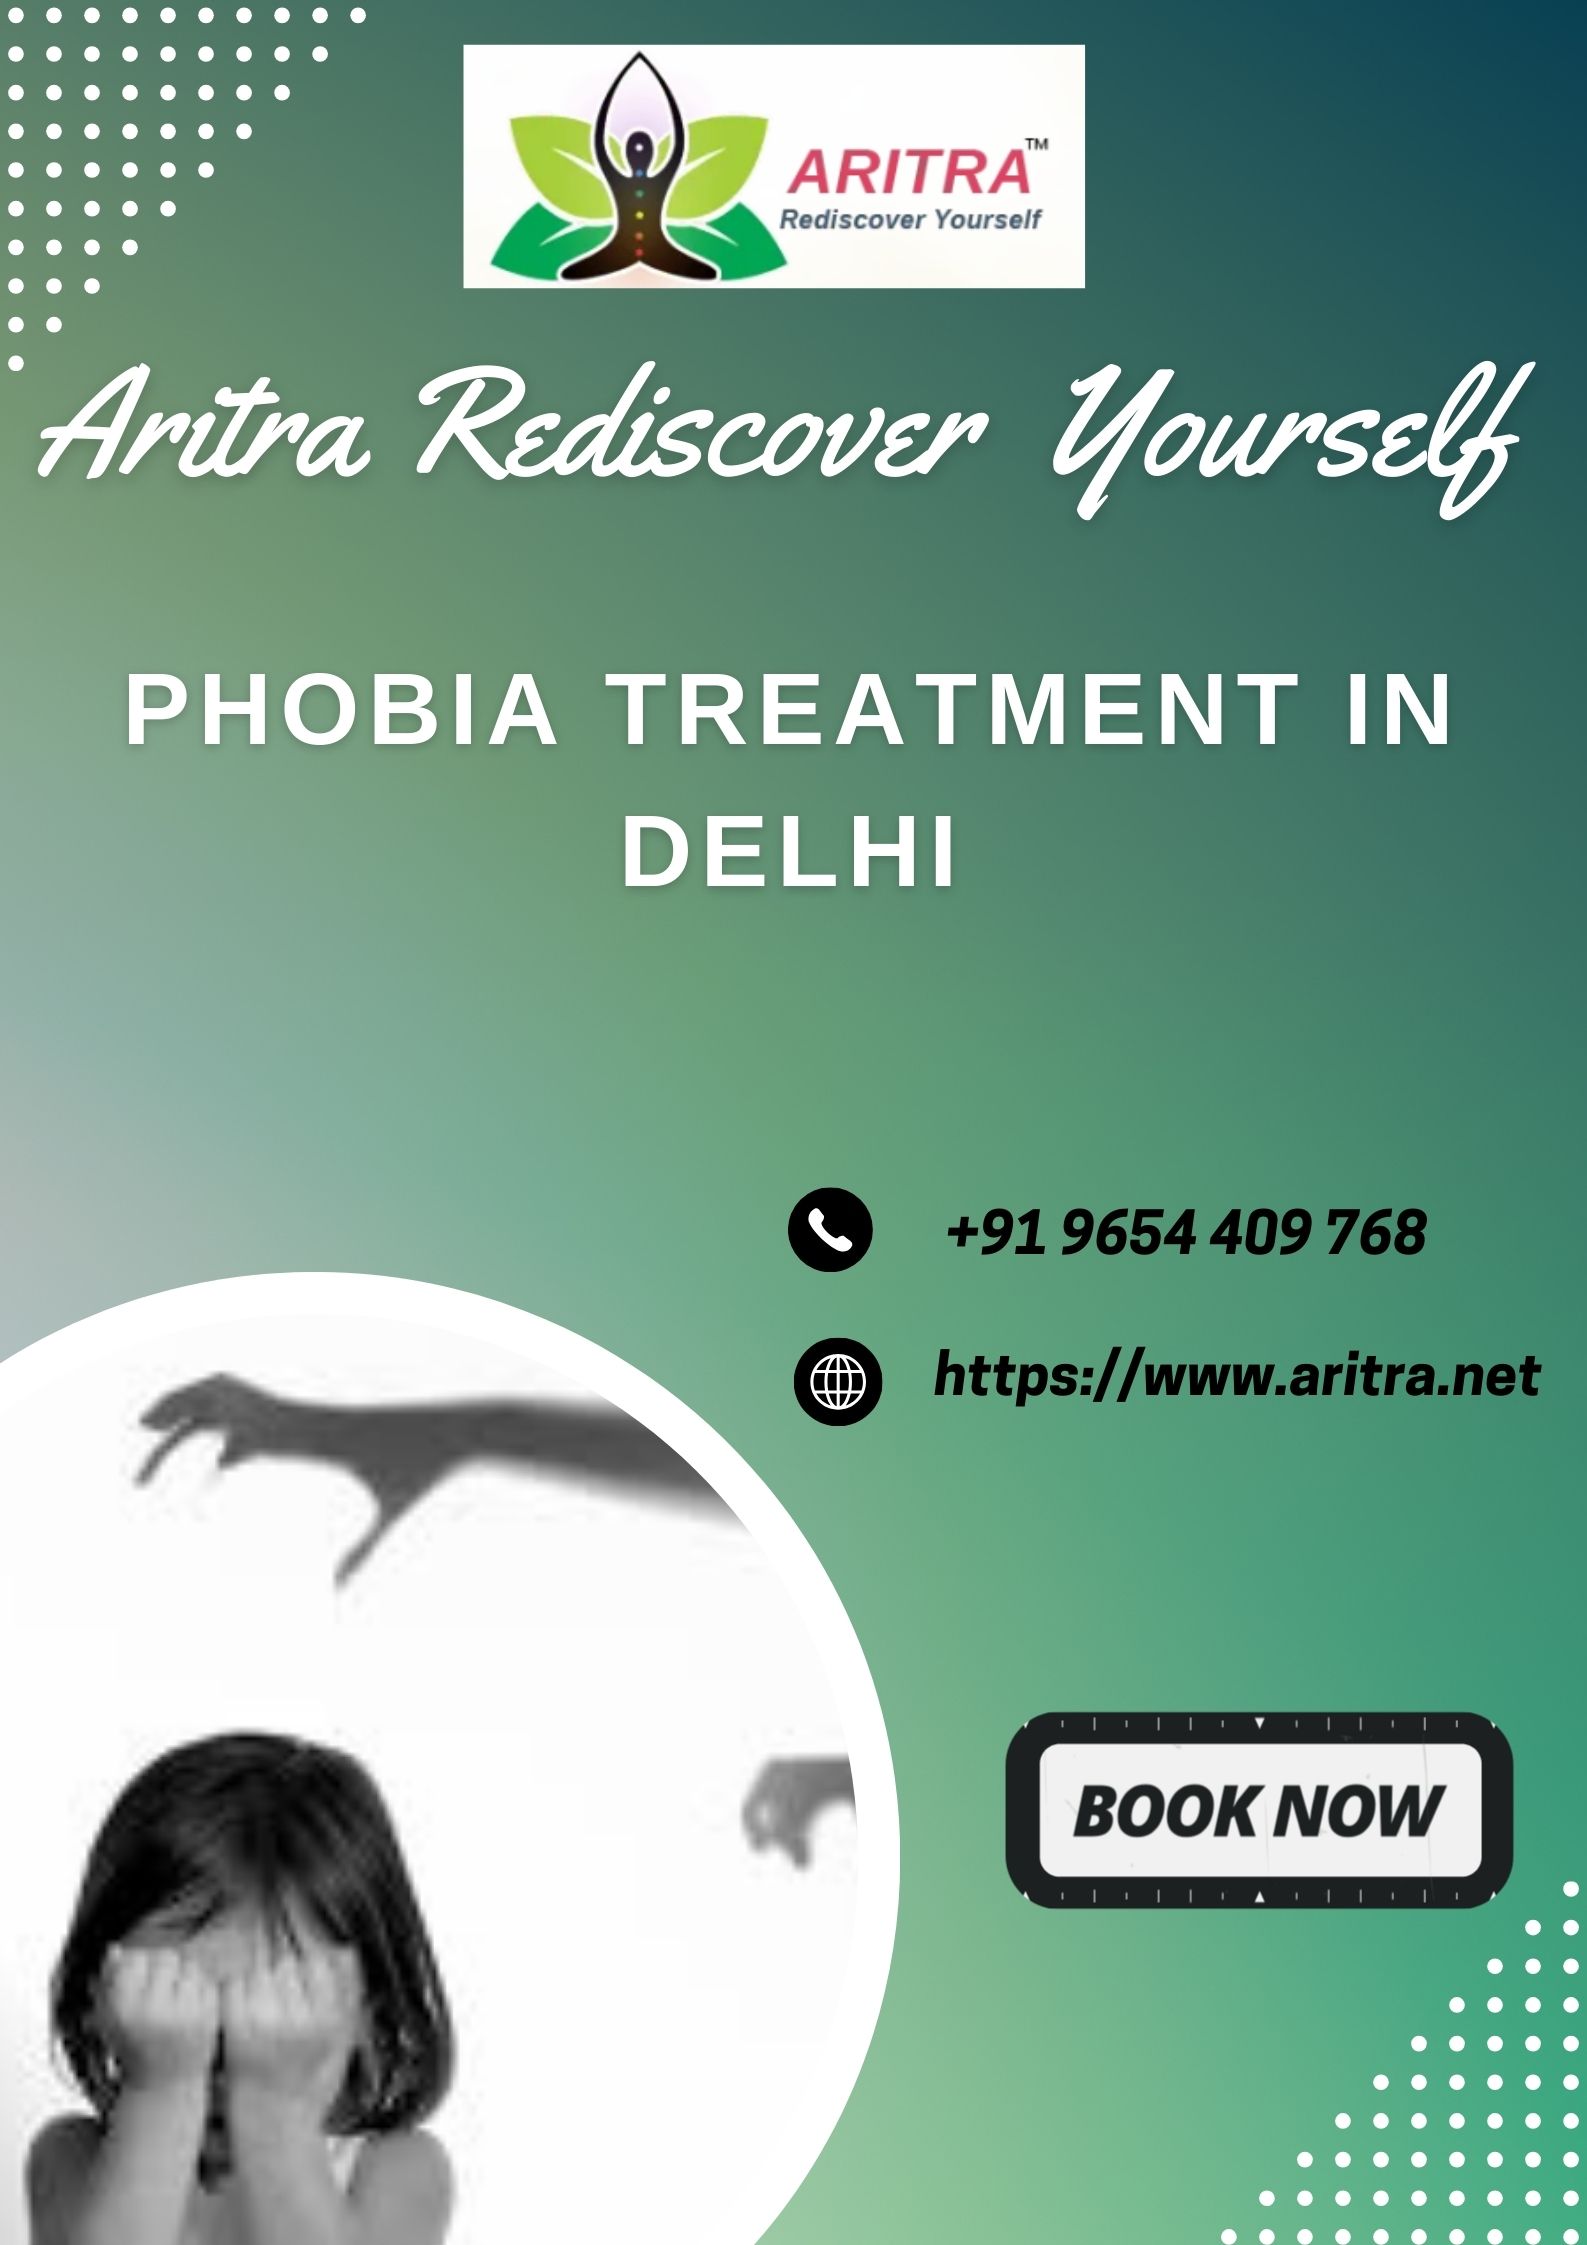 Phobia Treatment in Delhi By Aritra Rediscover yourself | Aritra